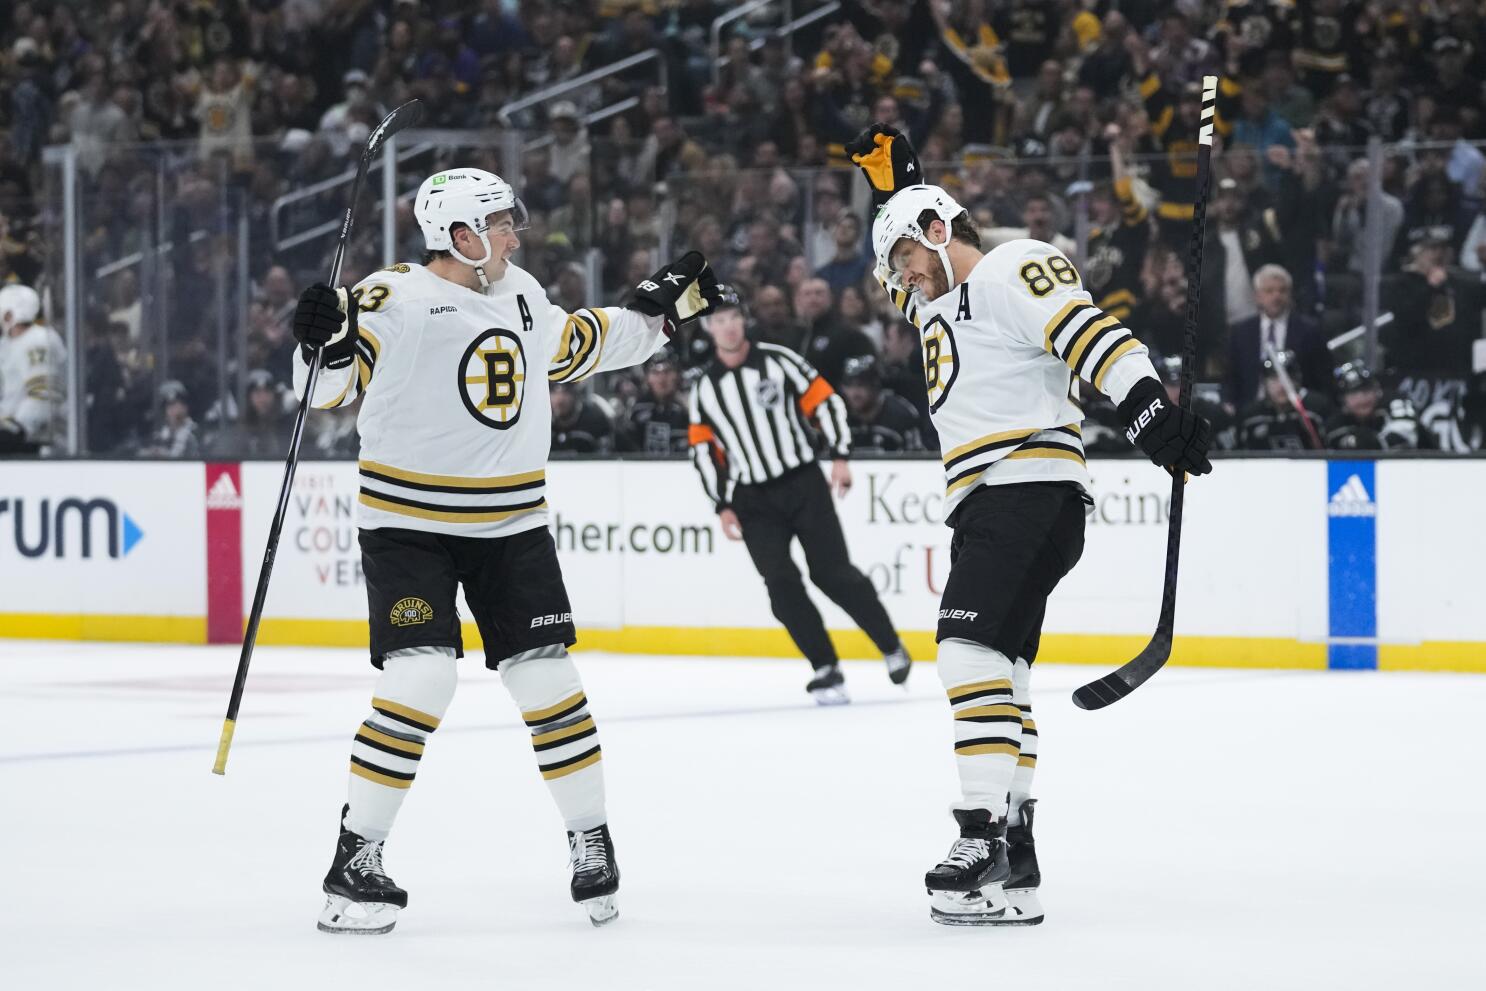 No choice: Lucic, Bruins look to bounce back in Game 2